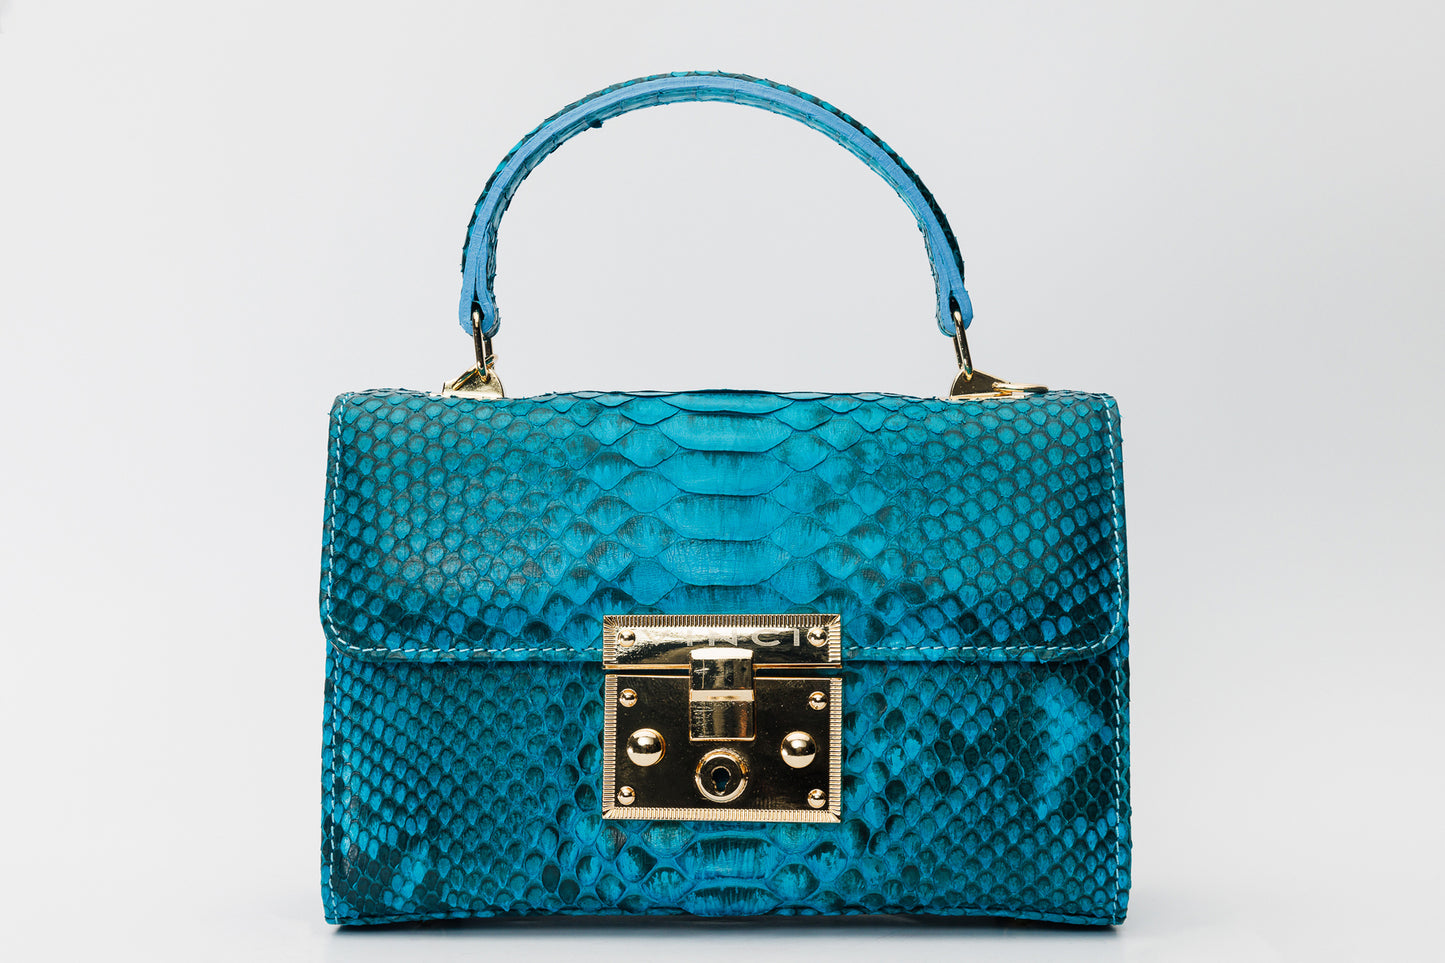 The Queen Turquoise Leather Handbag